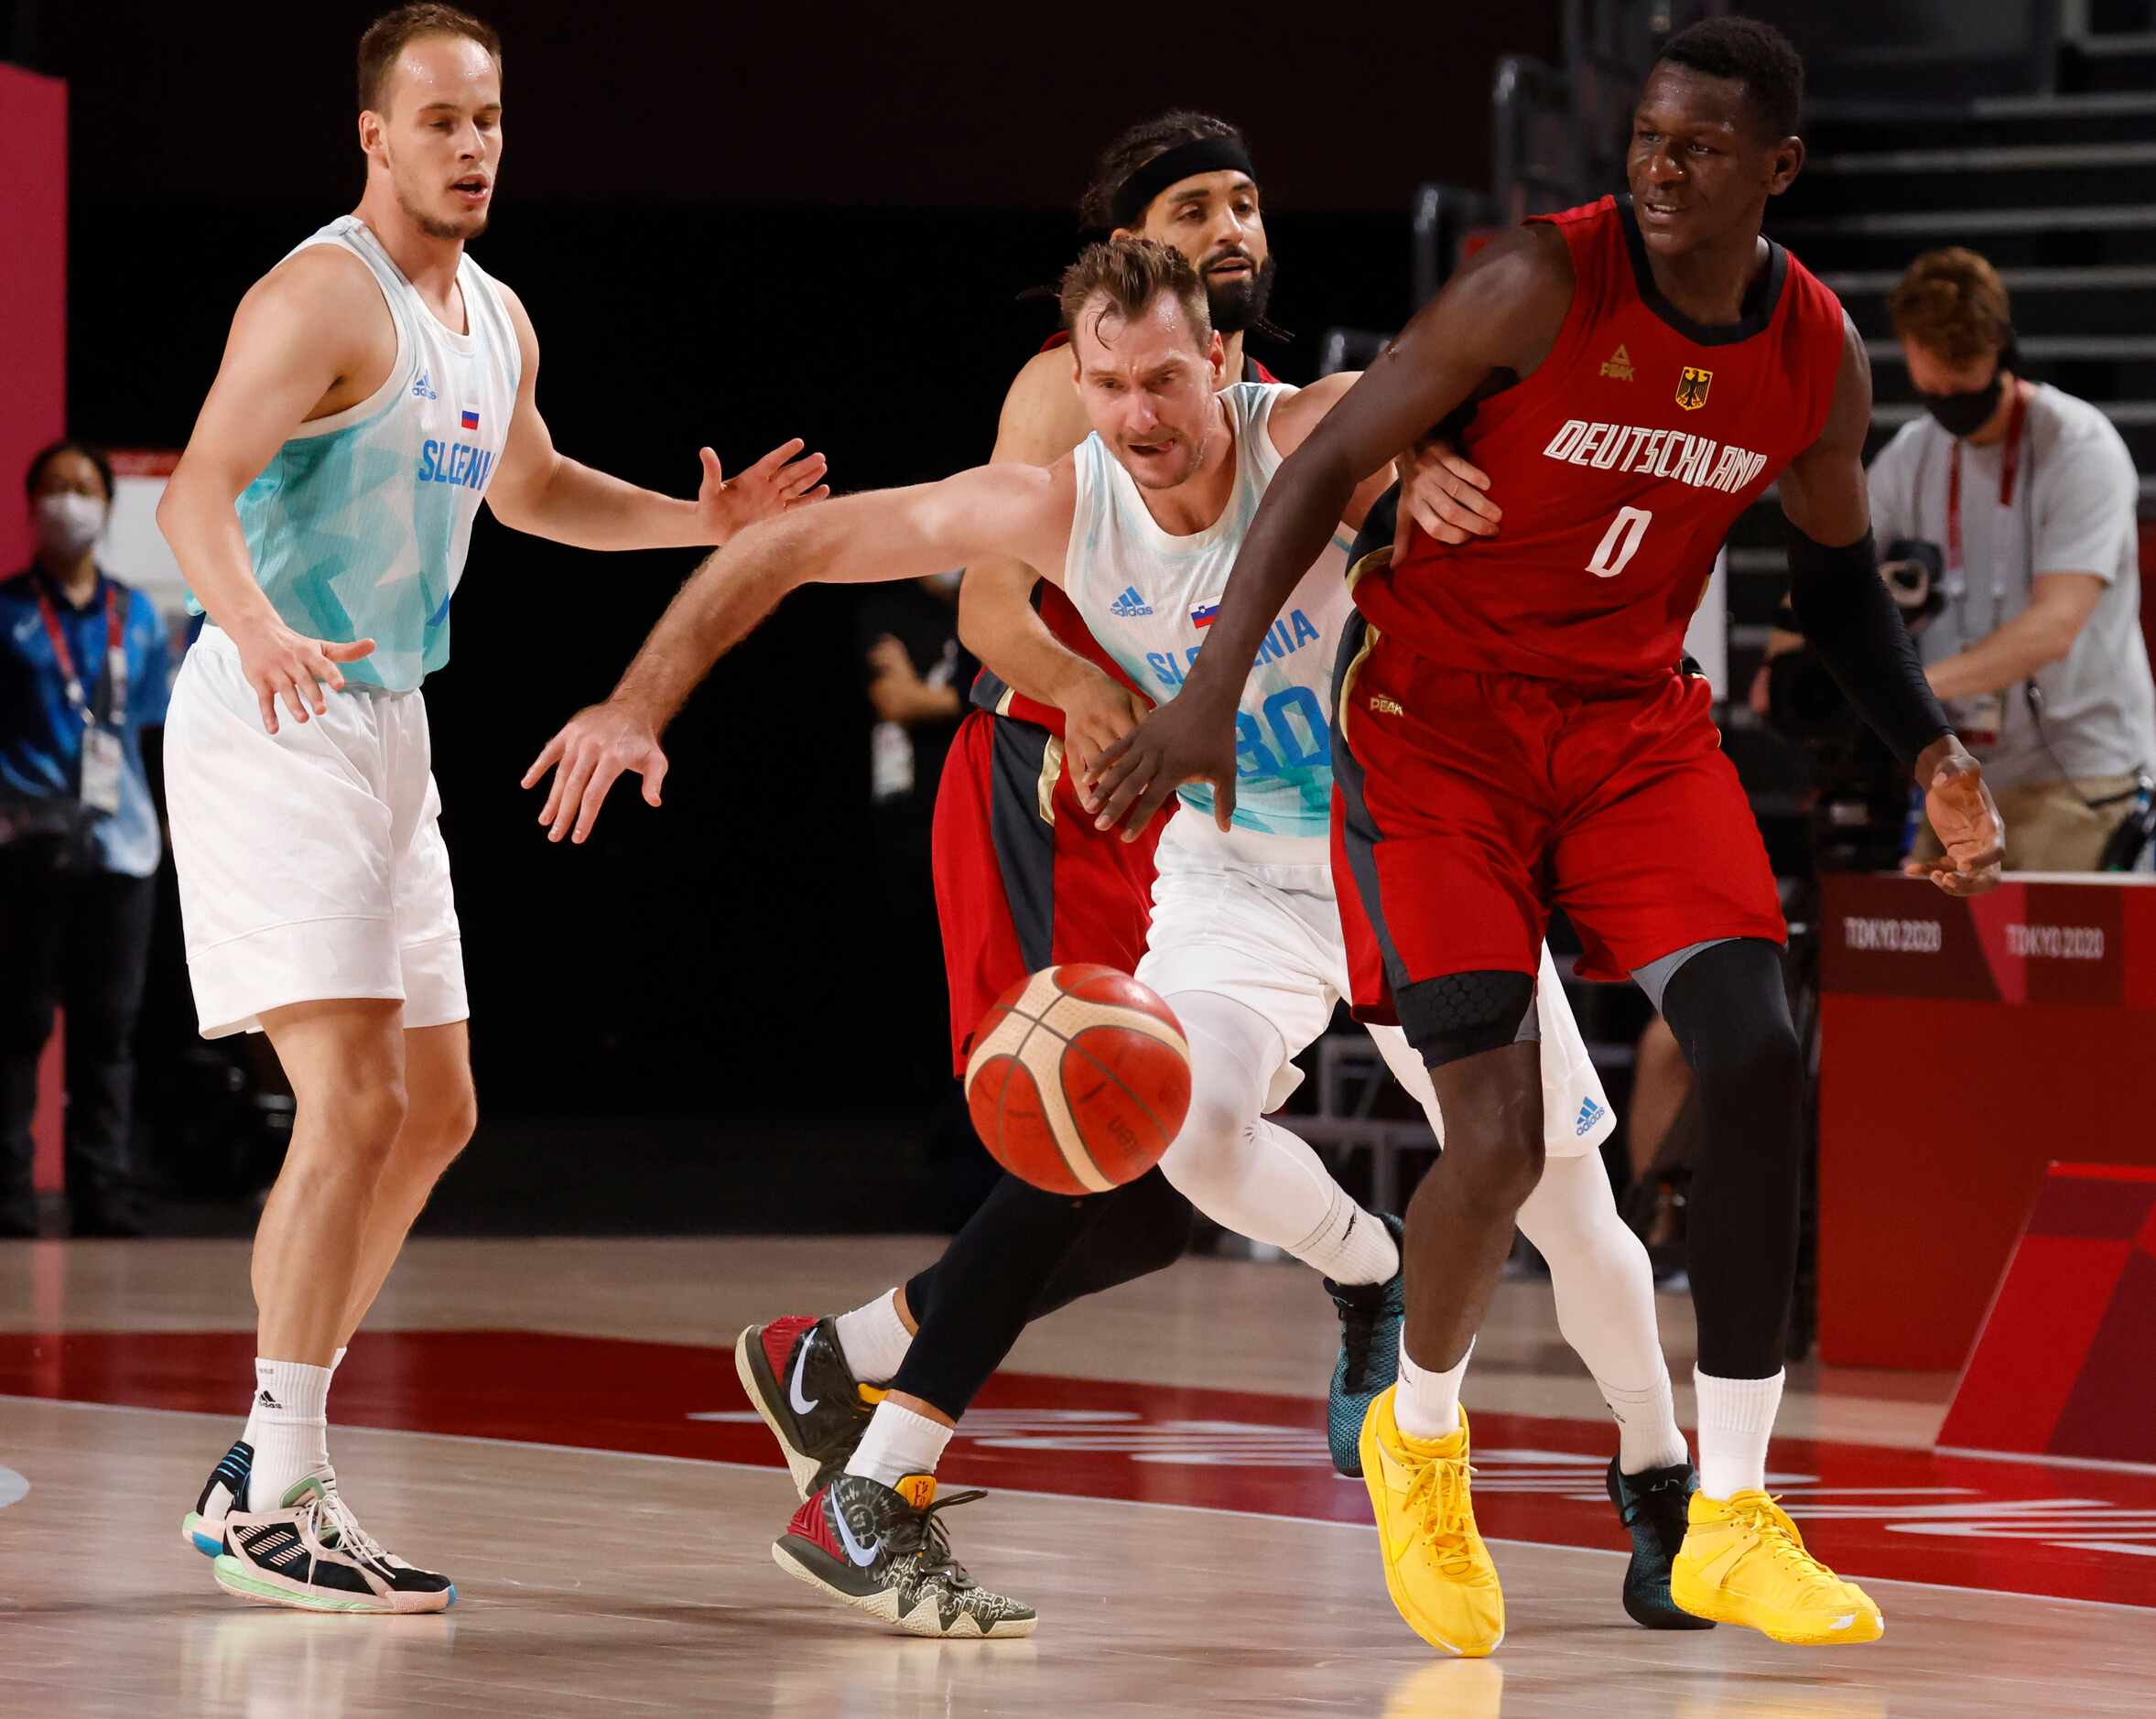 Slovenia’s Zoran Dragic (30) knocks the ball out of the hands of Germany’s Isaac Bonga (0)...